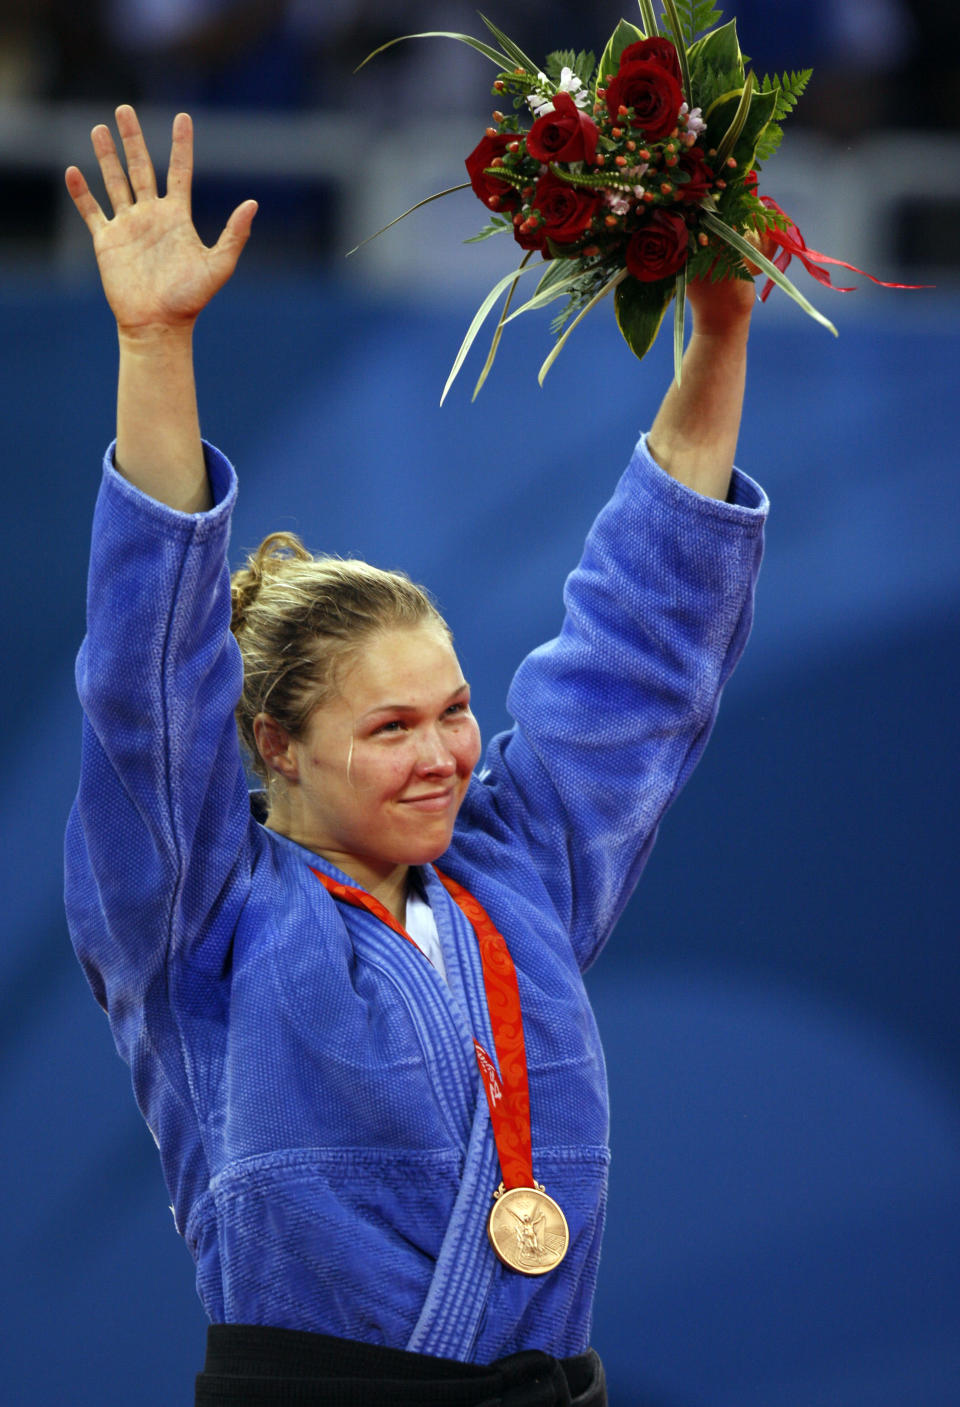 Bronze medalist Ronda Rousey of the United States, celebrates during the medals ceremony for the women's -70kg judo middleweight division finals at the Beijing 2008 Olympics in Beijing, Wednesday, Aug. 13, 2008. (AP Photo/Charles Dharapak)